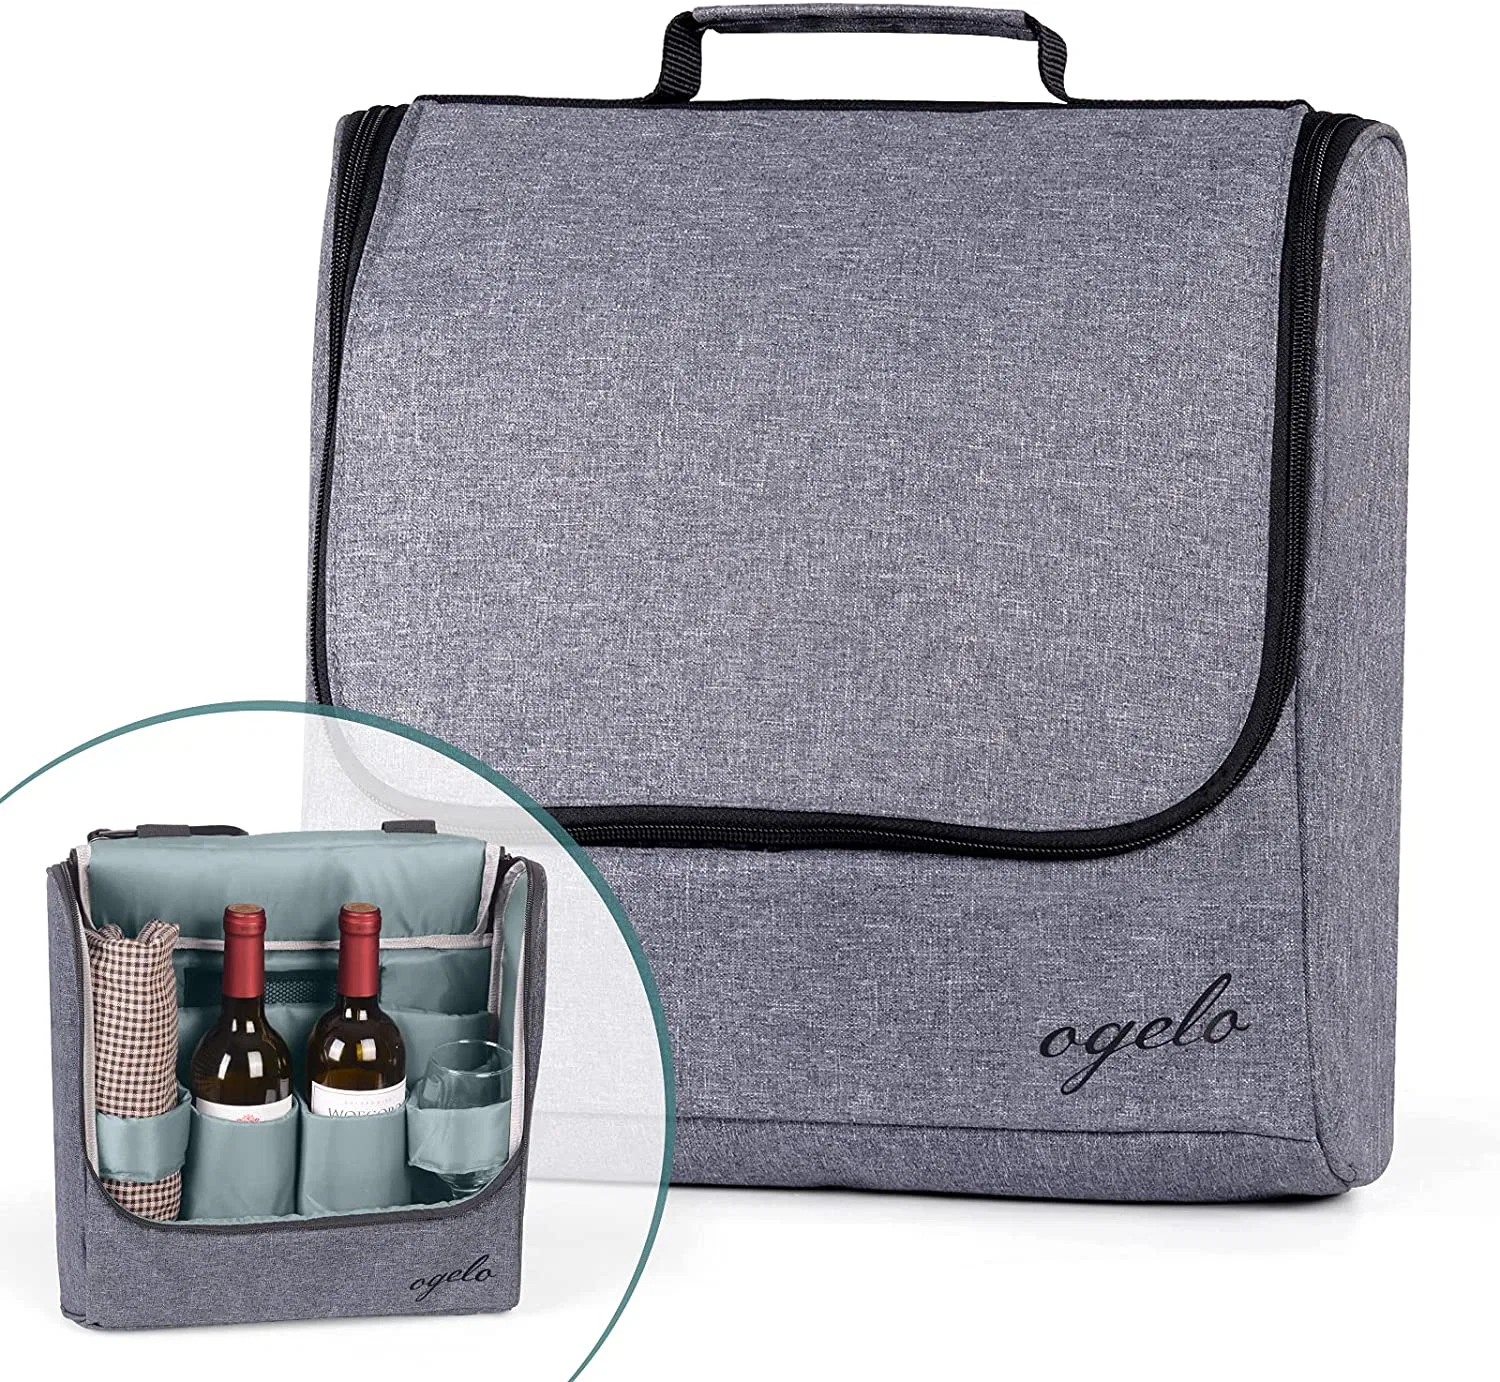 Picnic Cooler Bag for Wine and Food